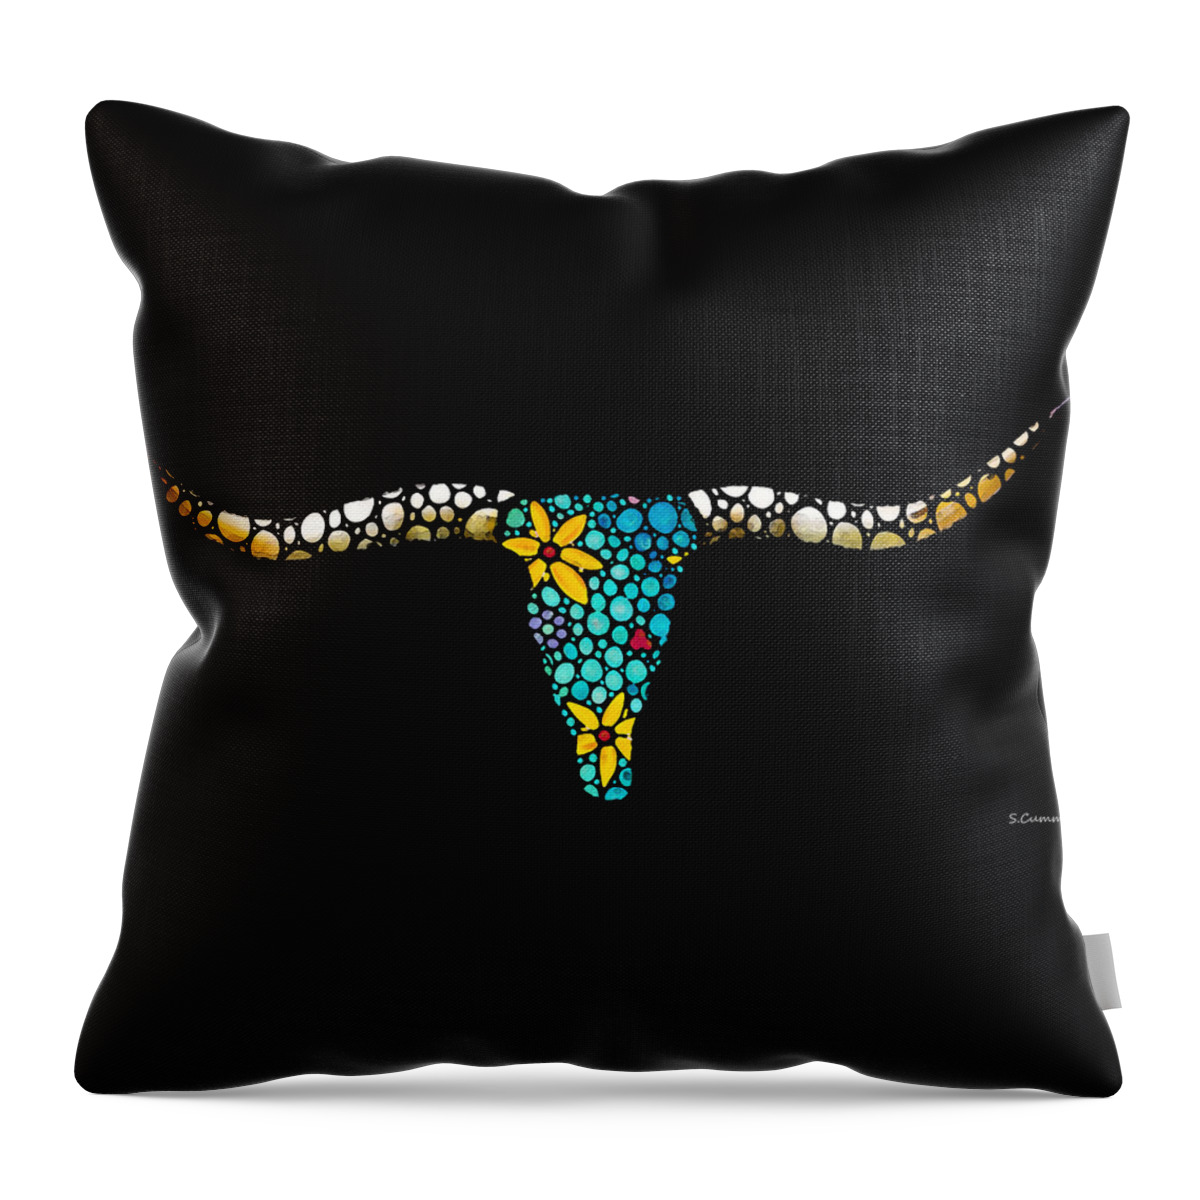 Cow Throw Pillow featuring the painting Love A Bull - Longhorn Art by Sharon Cummings